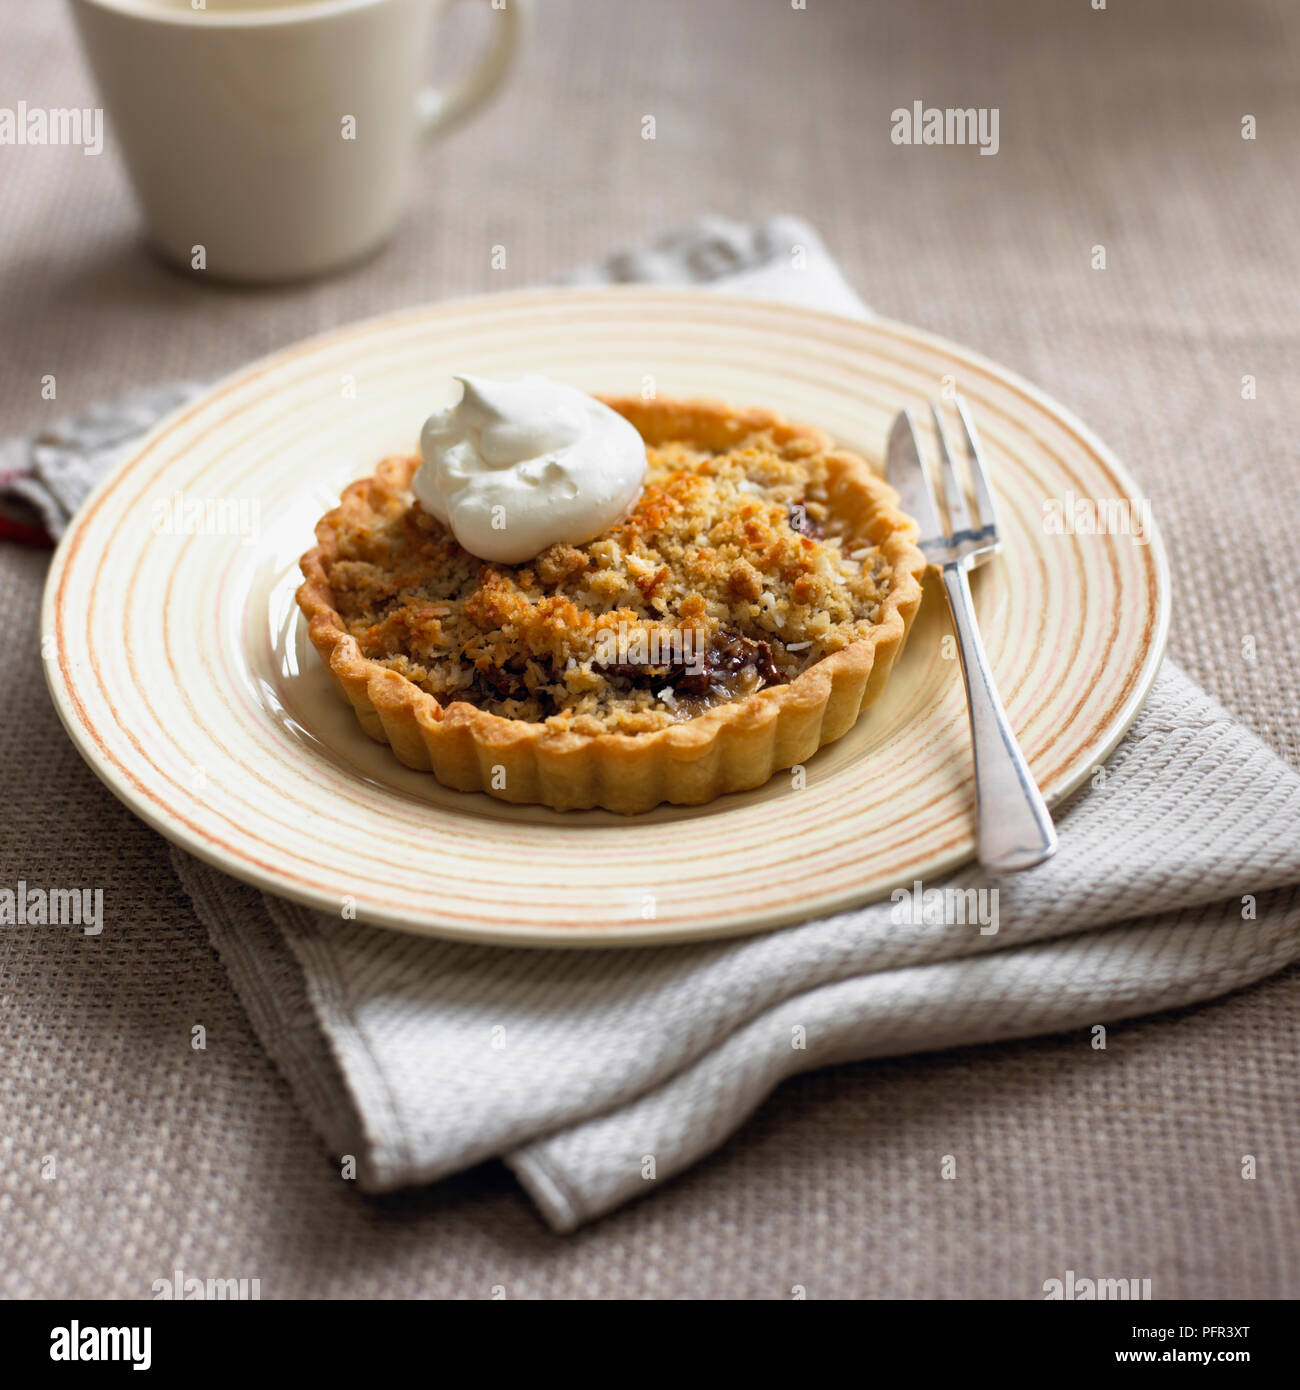 Banana and chocolate spread crumble tartlet, served with dollop of cream Stock Photo